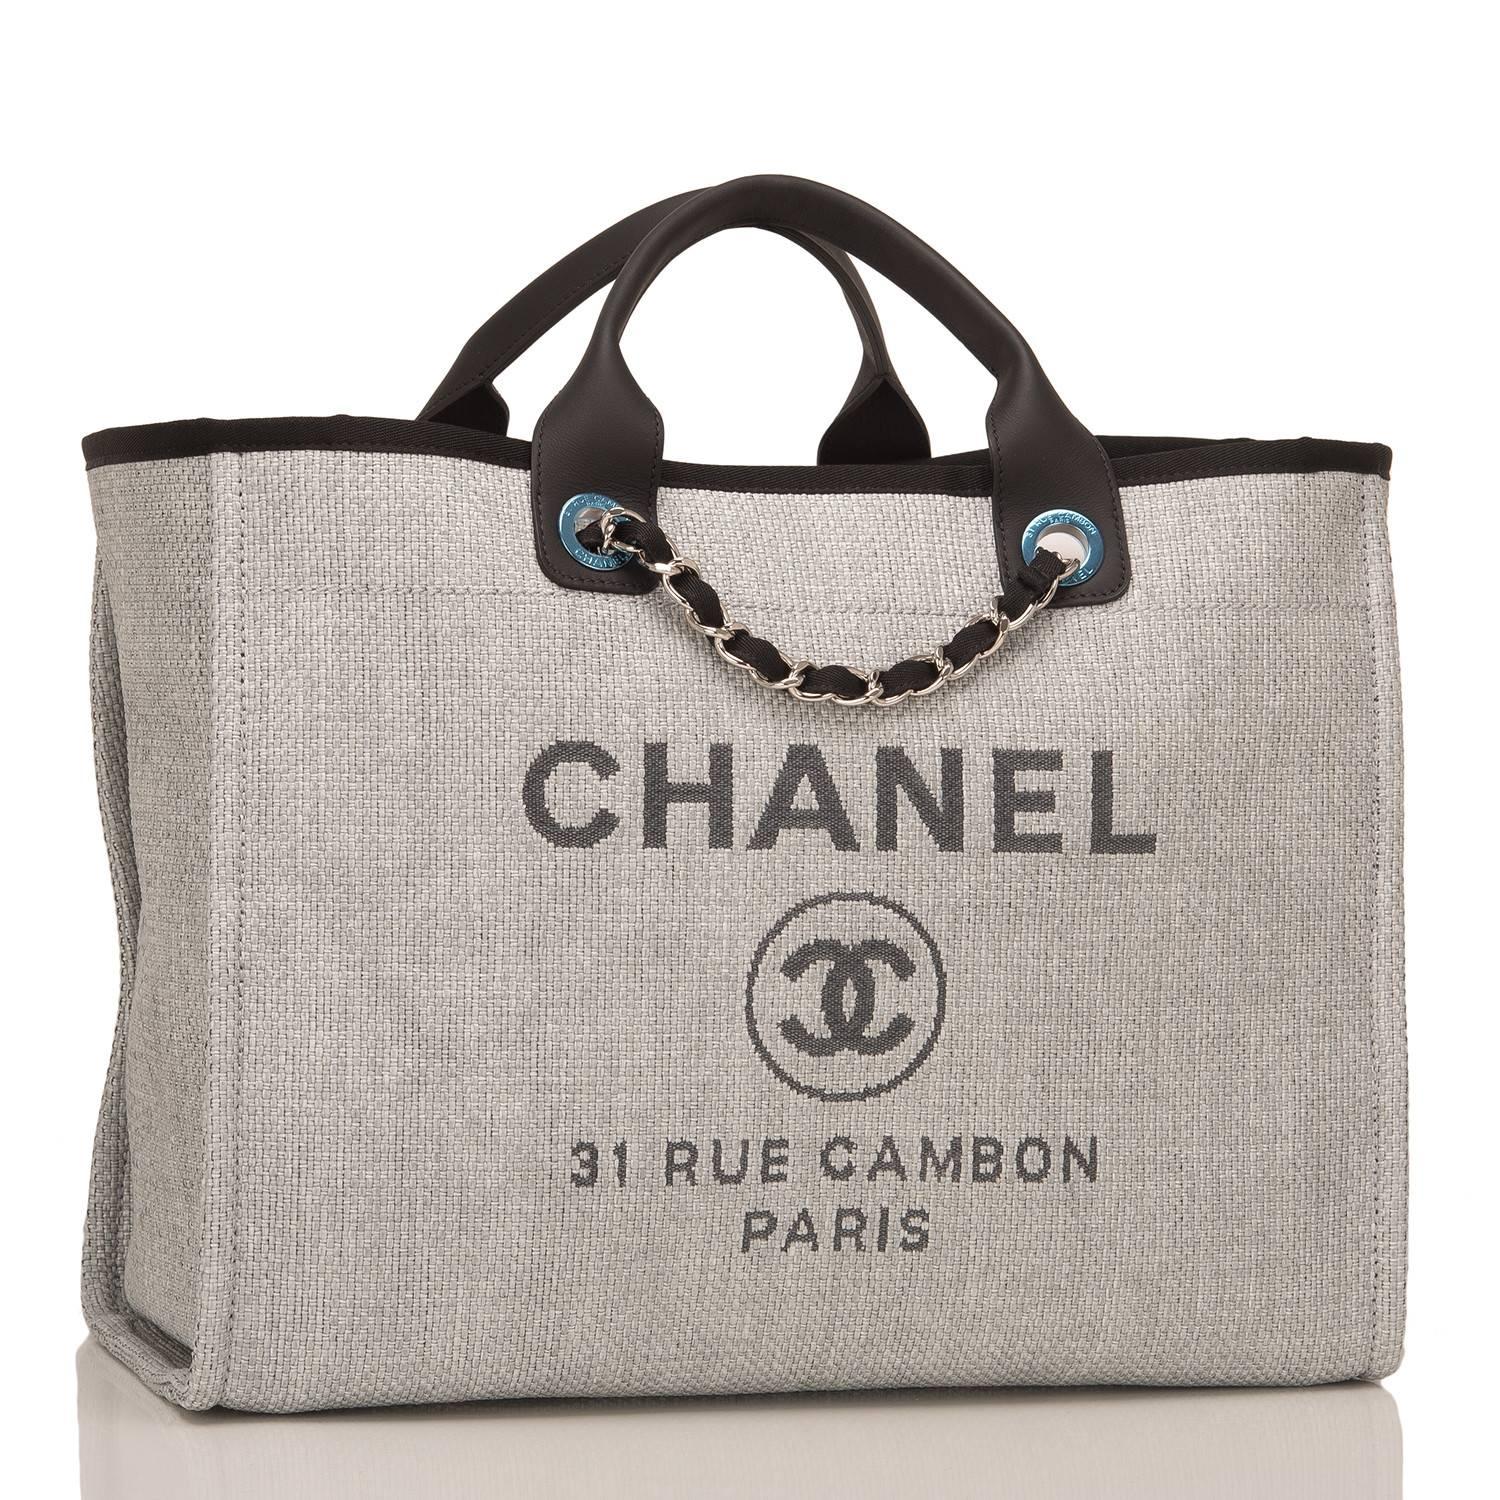 Chanel large Deauville shopping tote 30cm of grey canvas with silver tone hardware.

This bag features Chanel logos and the street name of Chanel's famous flagship store, 